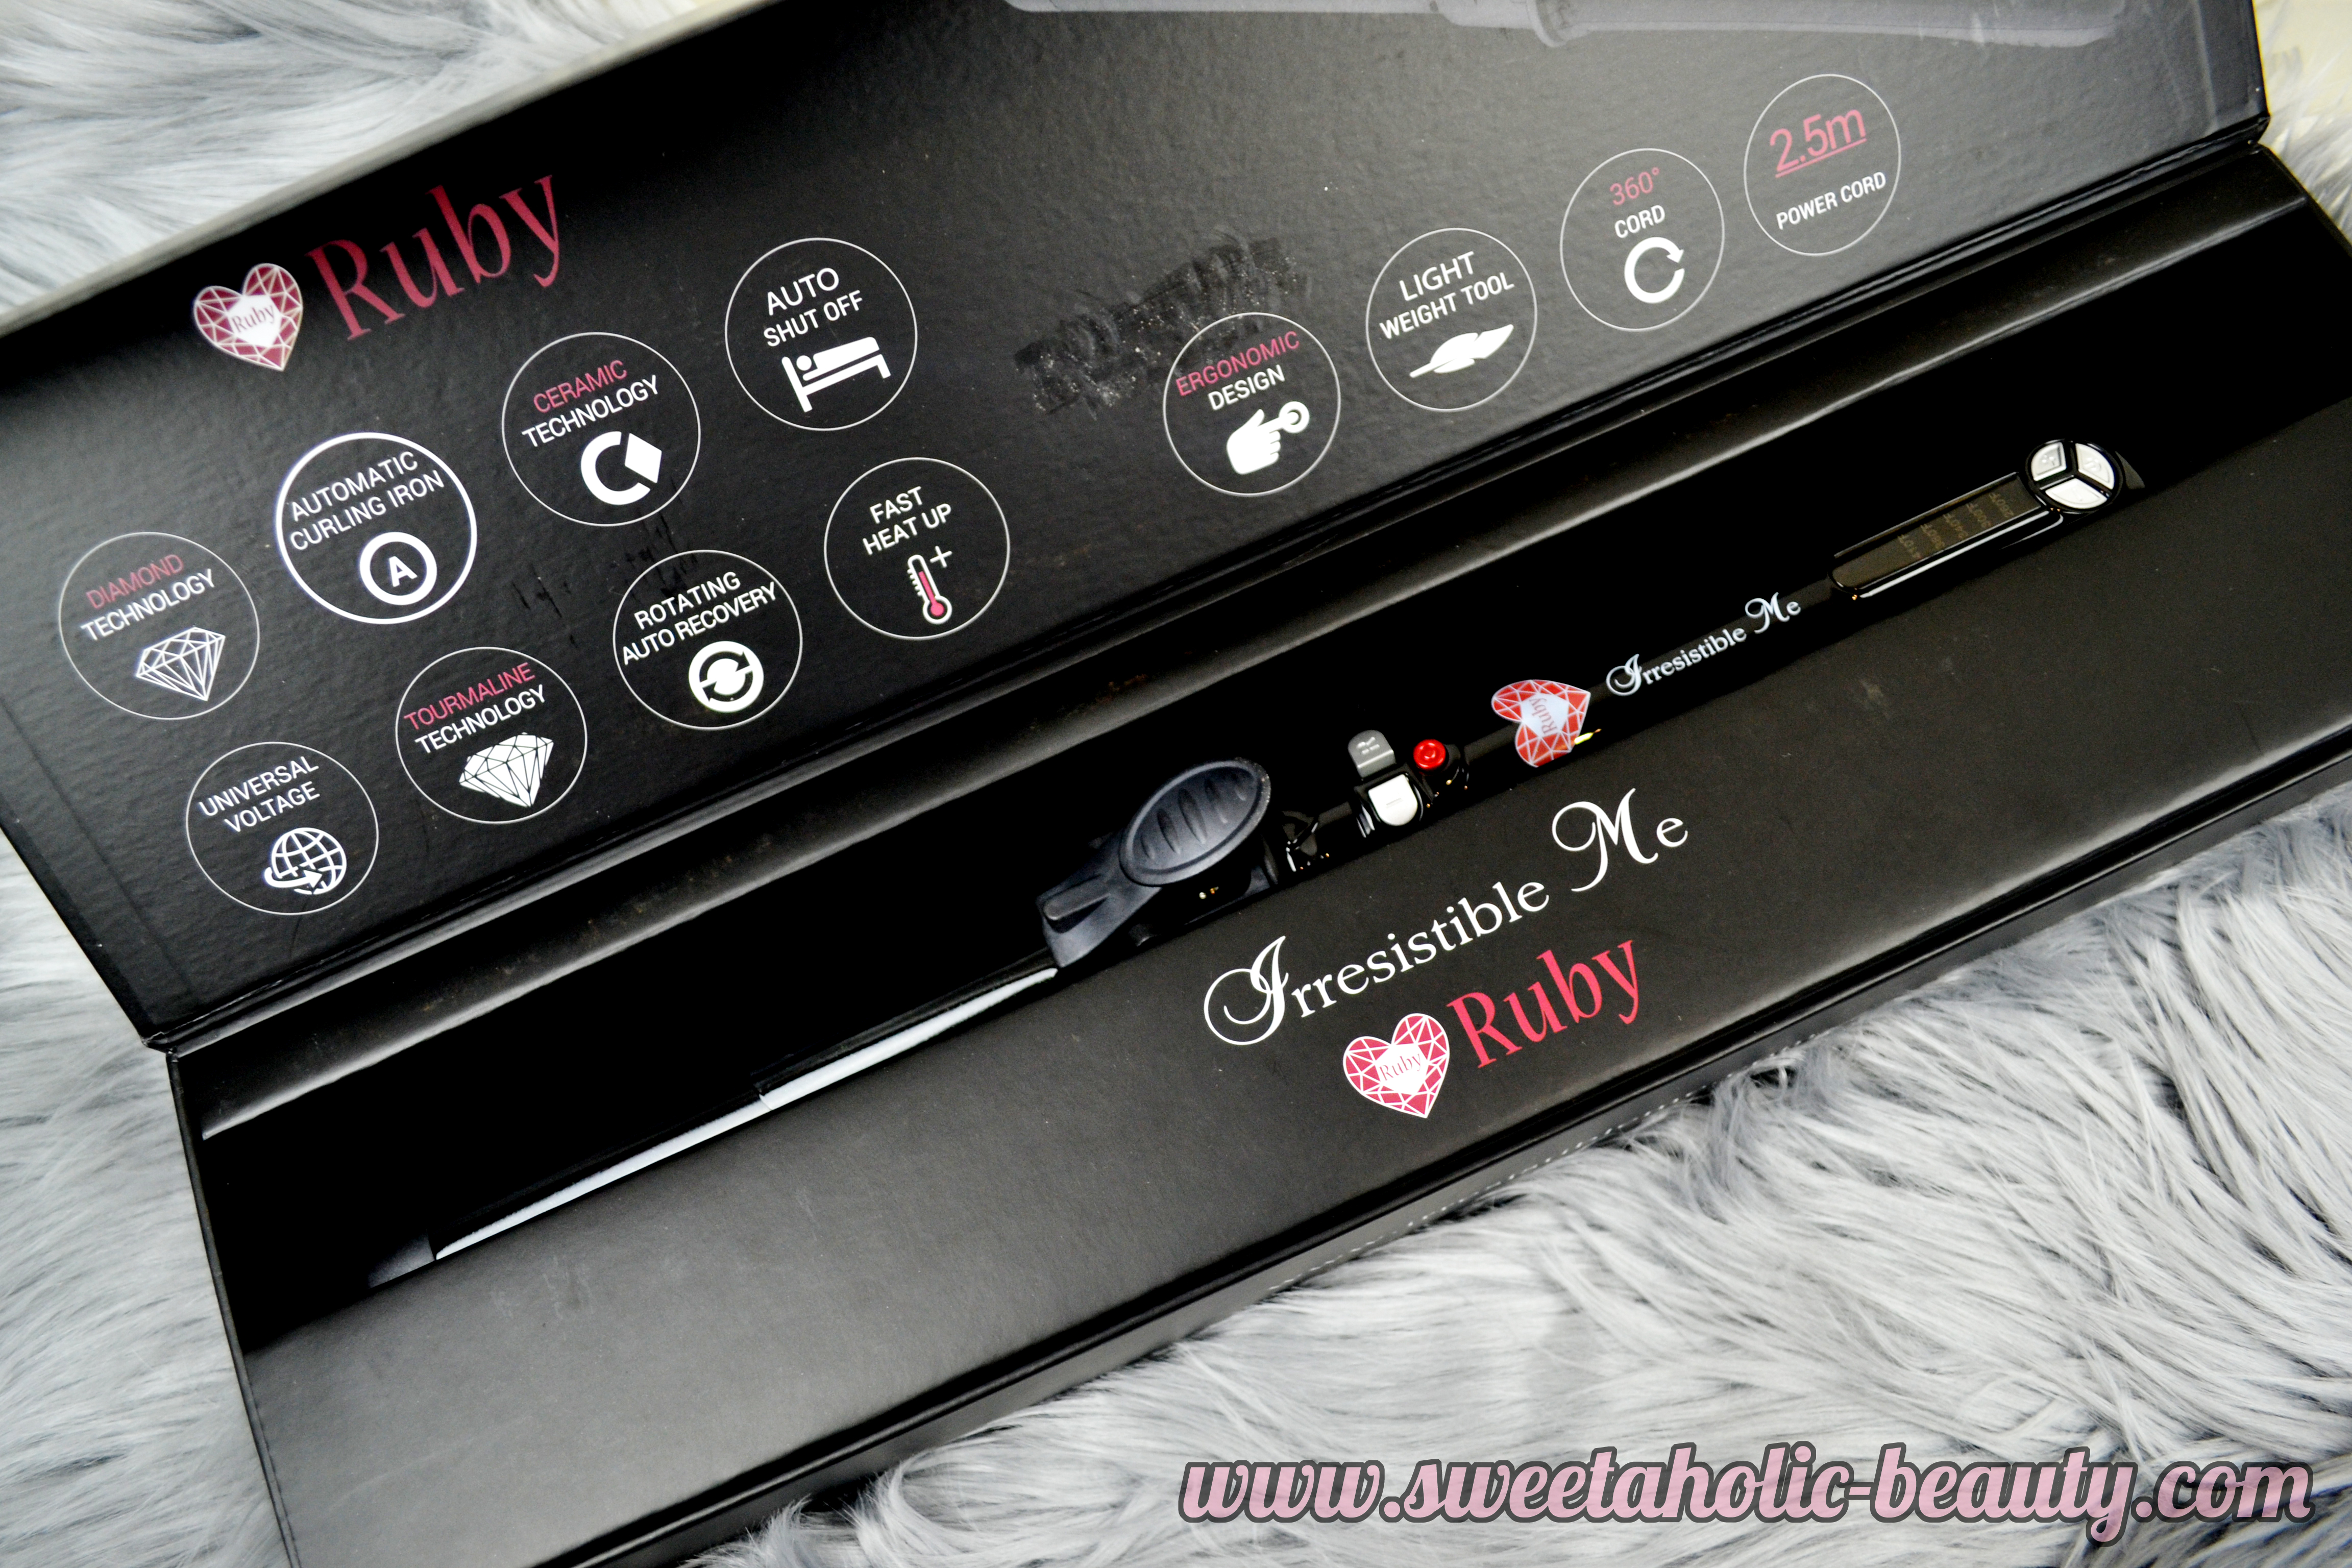 Irresistible Me Ruby Auto-Rotating Curling Iron Trialled & Tested - Sweetaholic Beauty